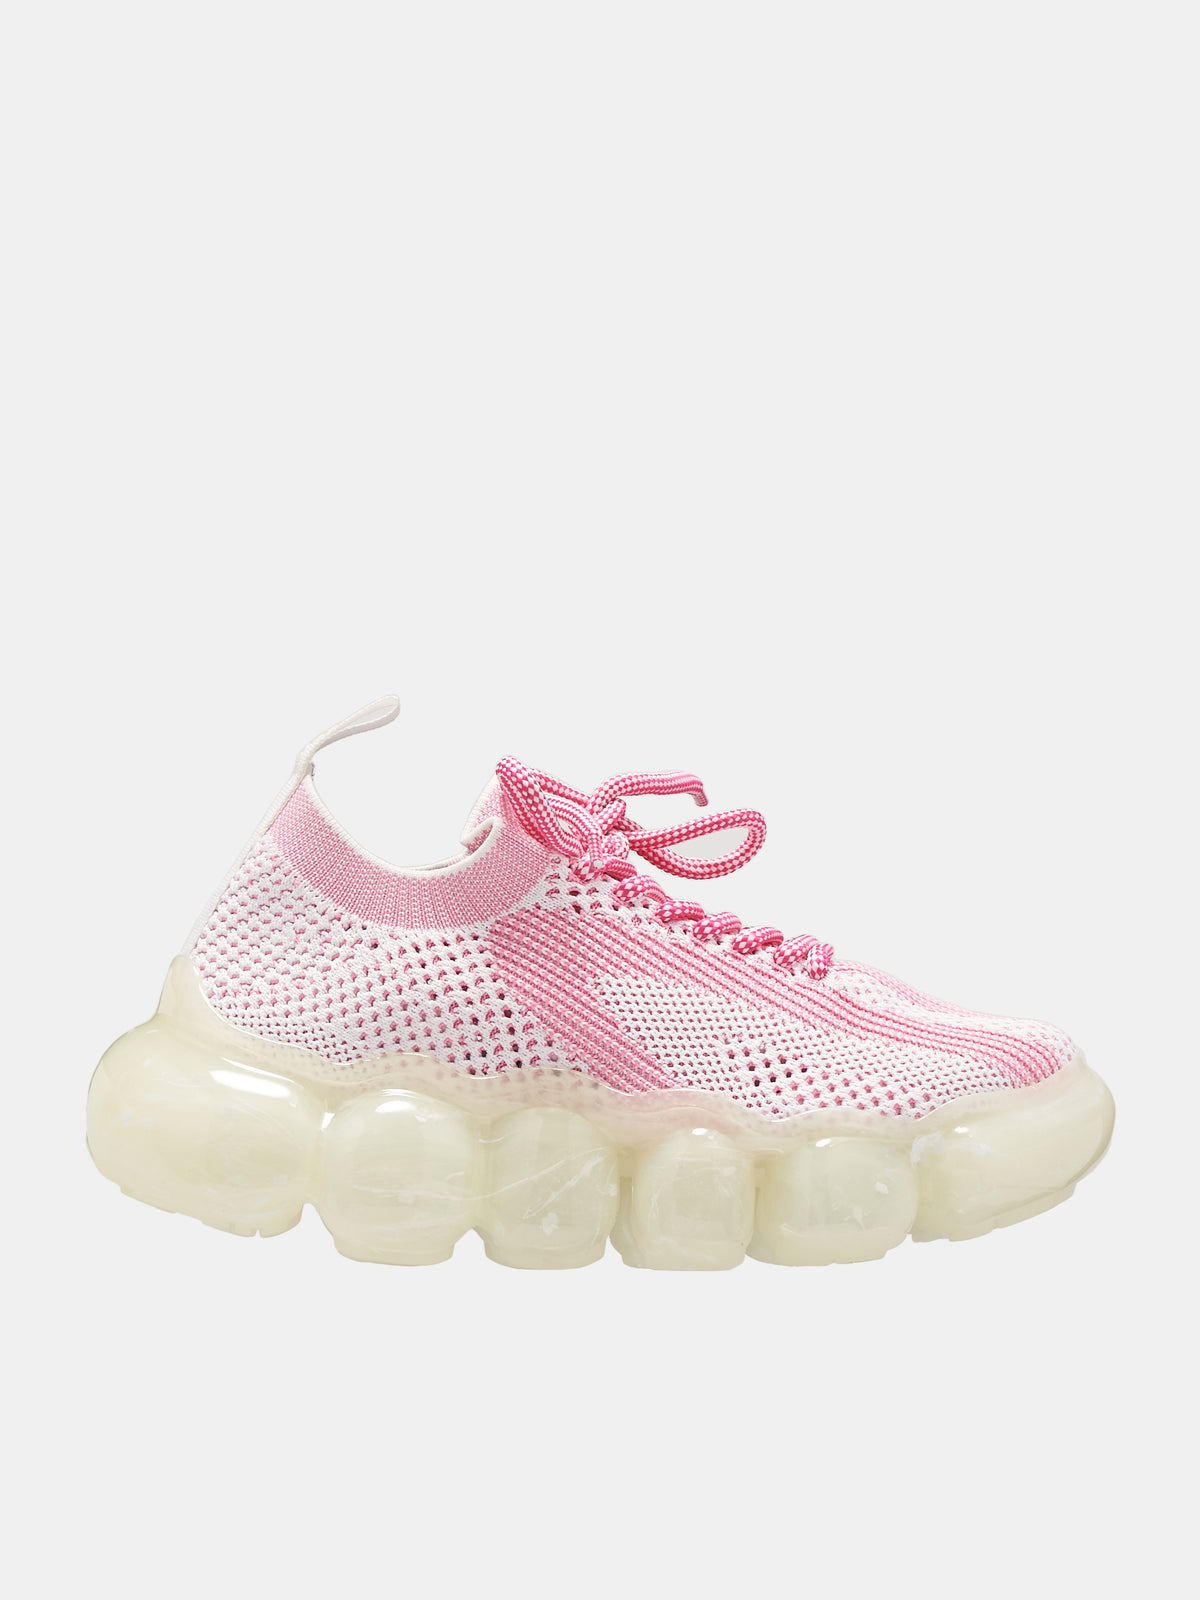 Jewelry Recycle Sneakers (595-WHITE-PINK)